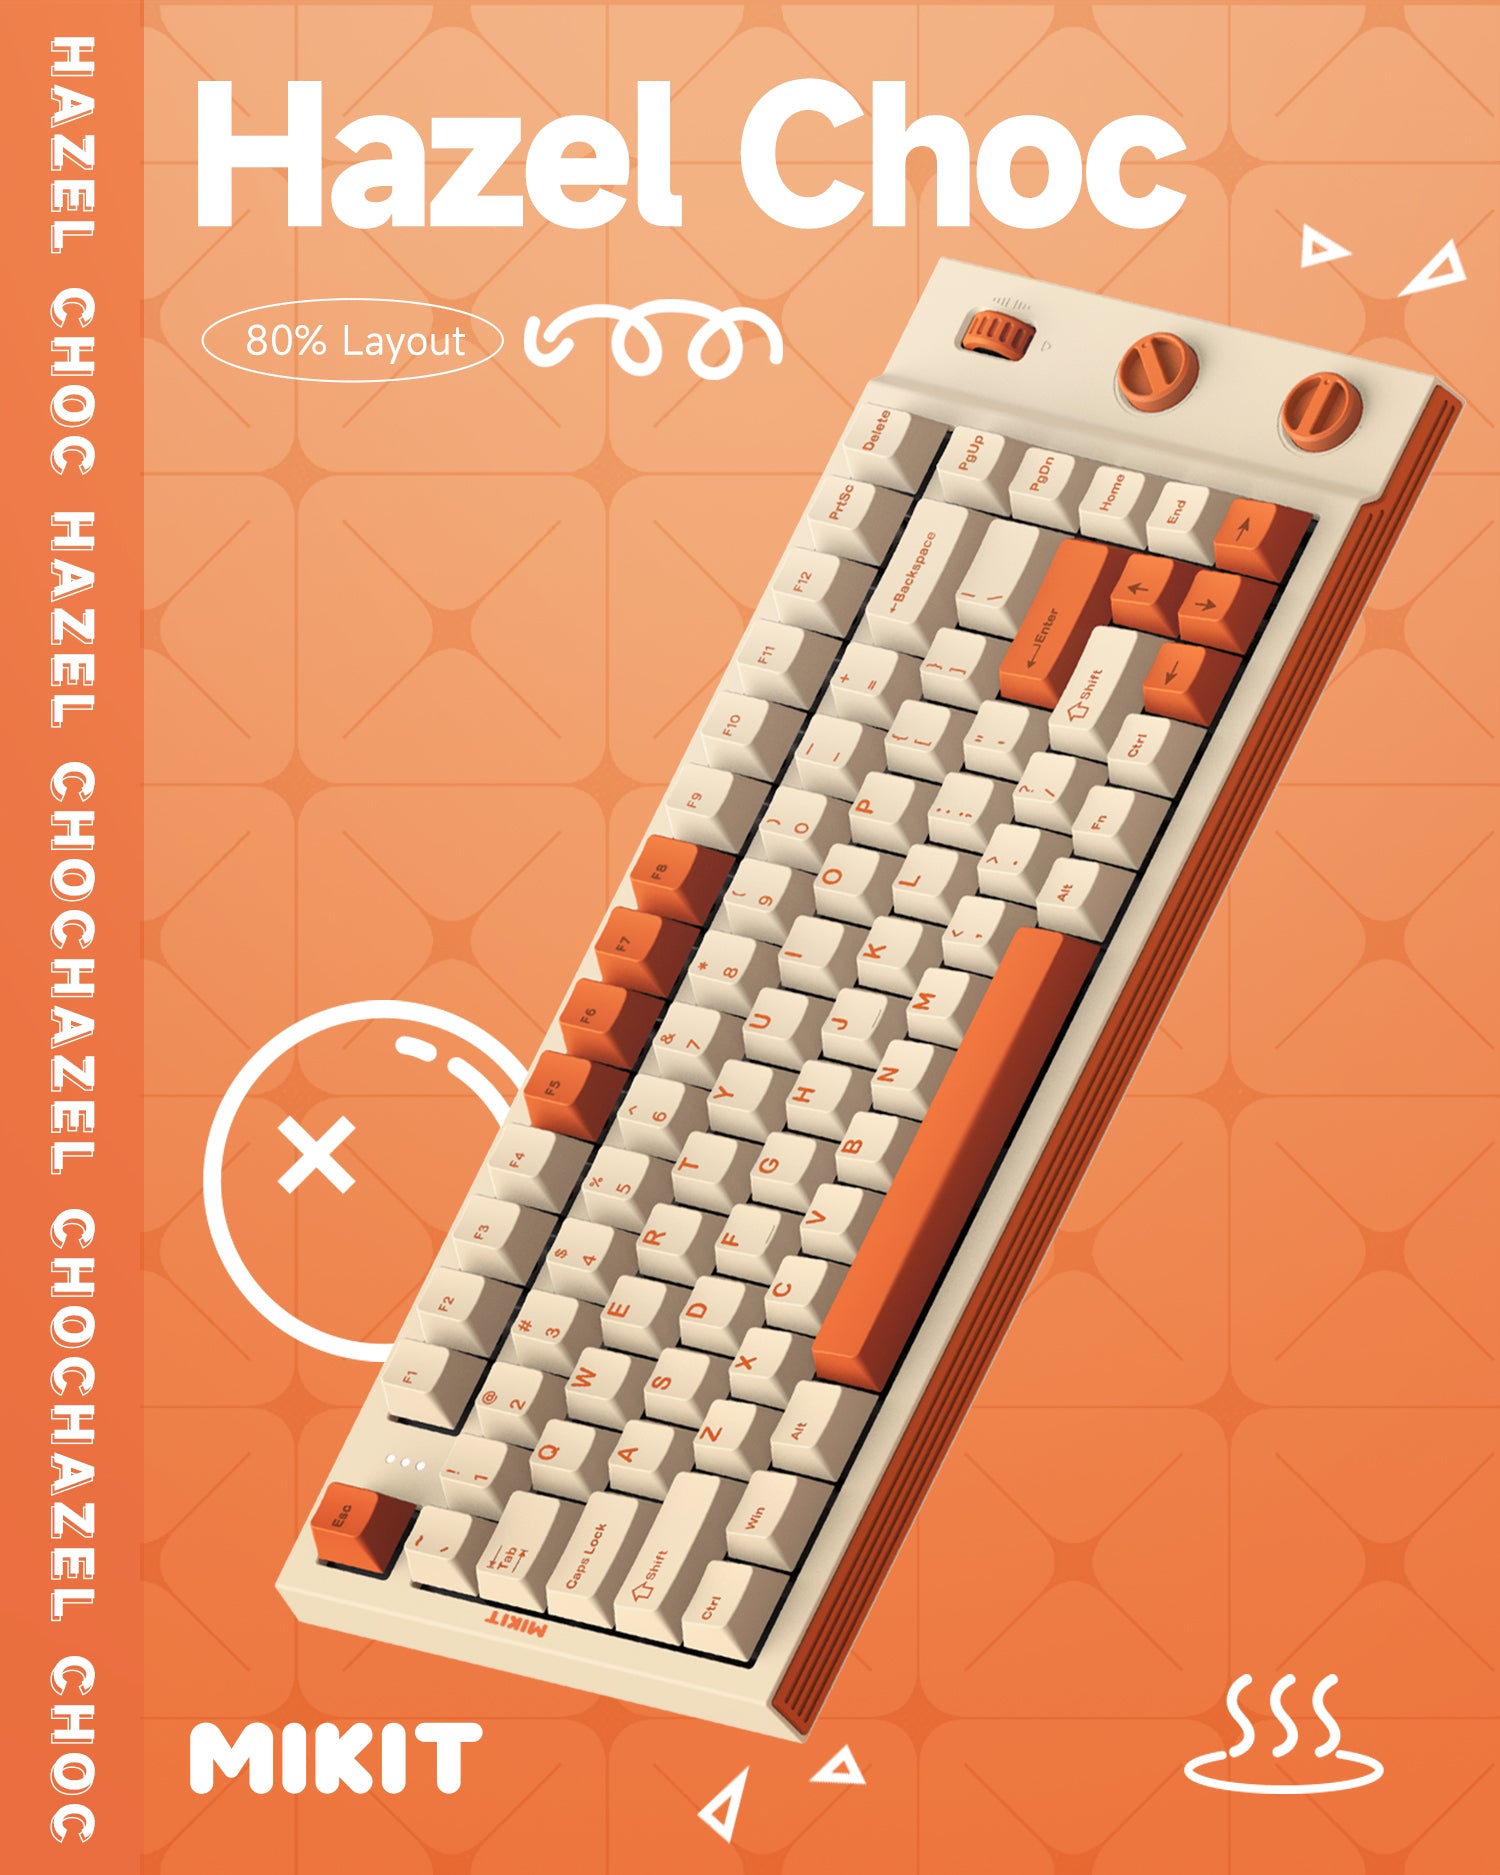 What is the reason for using mechanical keyboards?